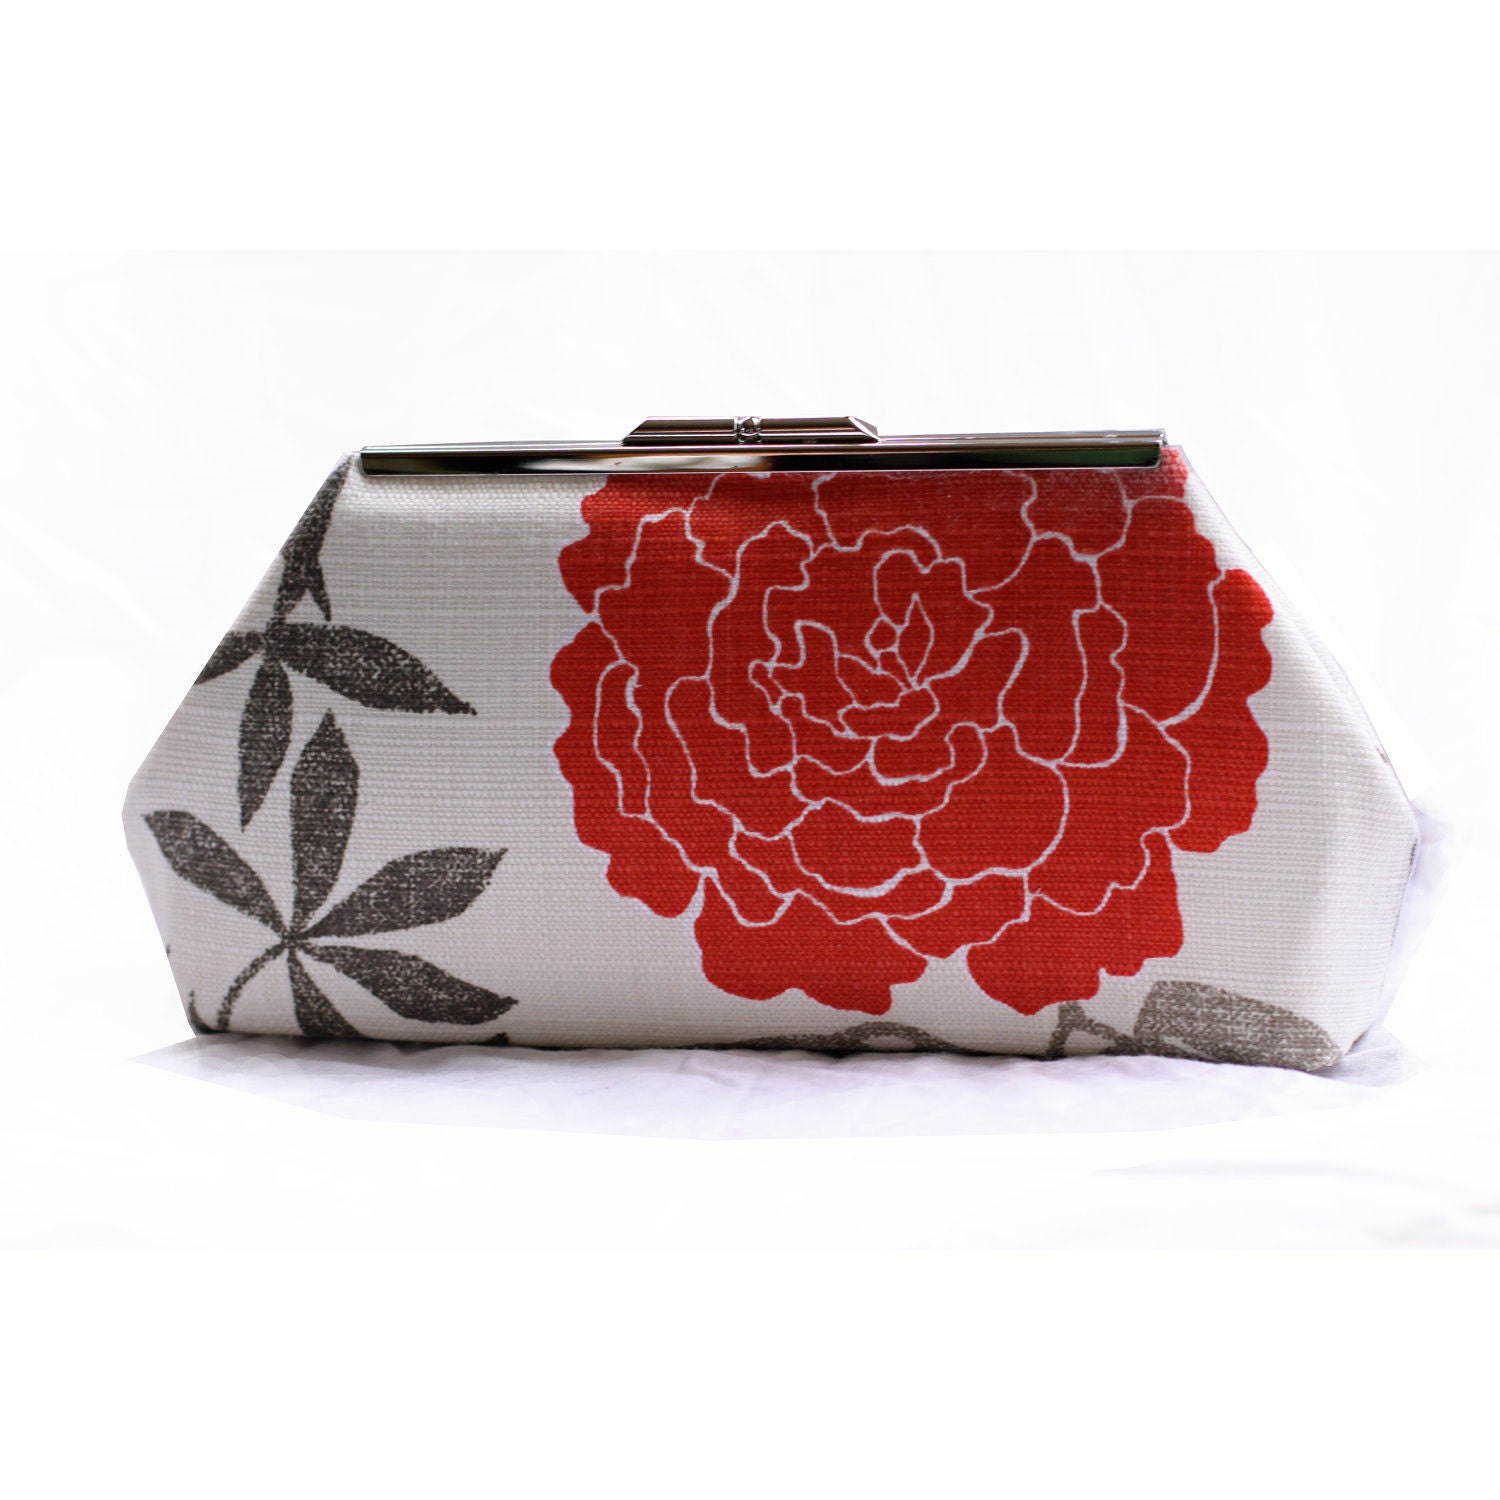 Red Peony Gray Leaves Clutch - OliverMichael